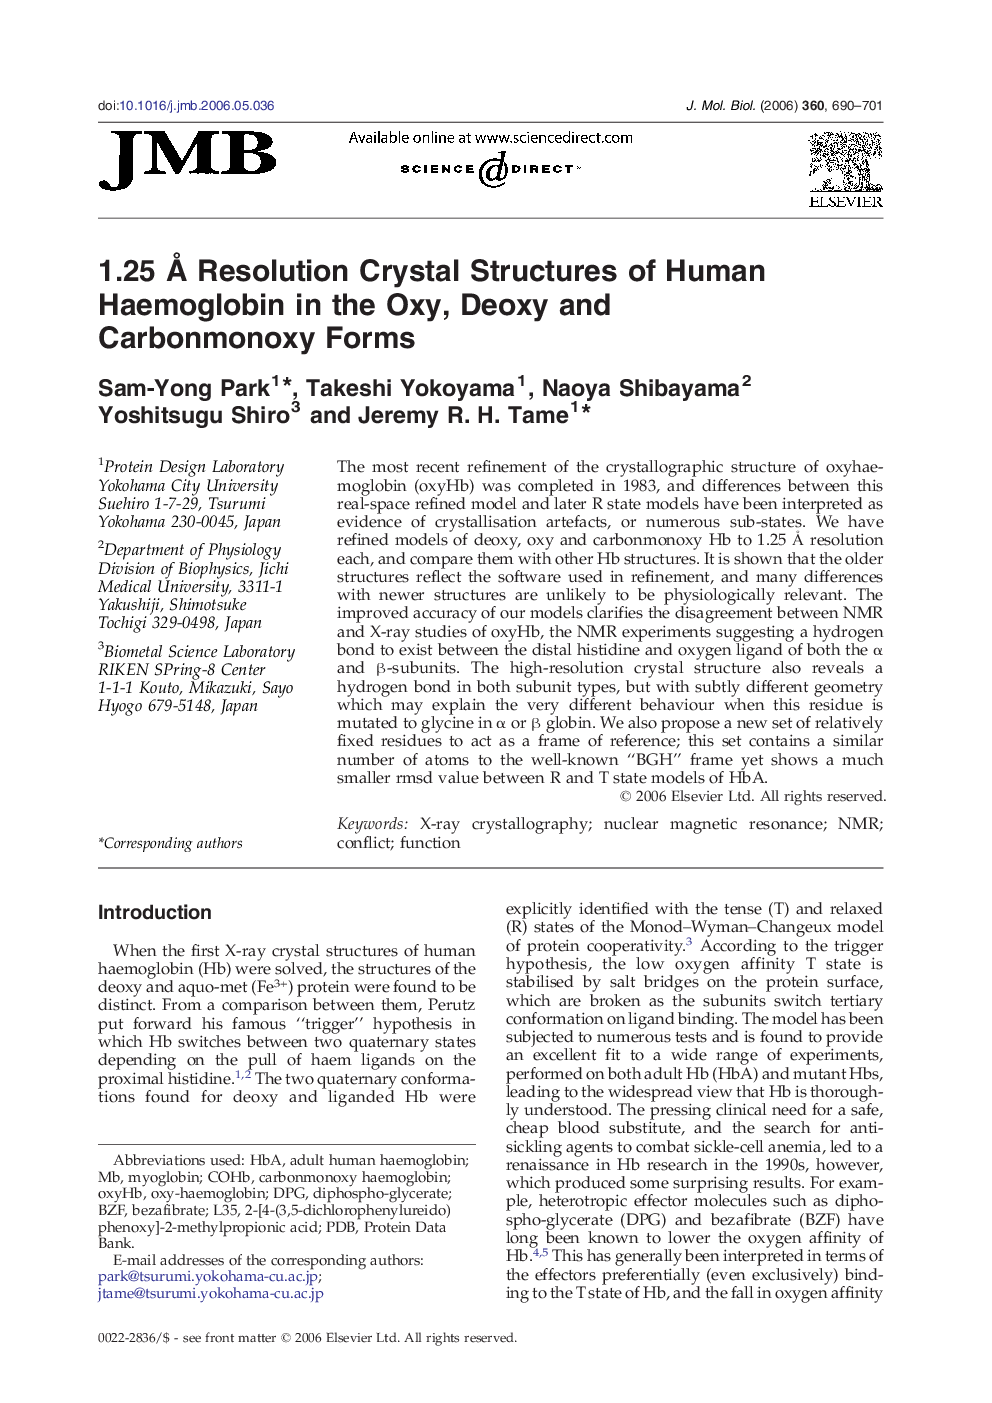 1.25 Å Resolution Crystal Structures of Human Haemoglobin in the Oxy, Deoxy and Carbonmonoxy Forms